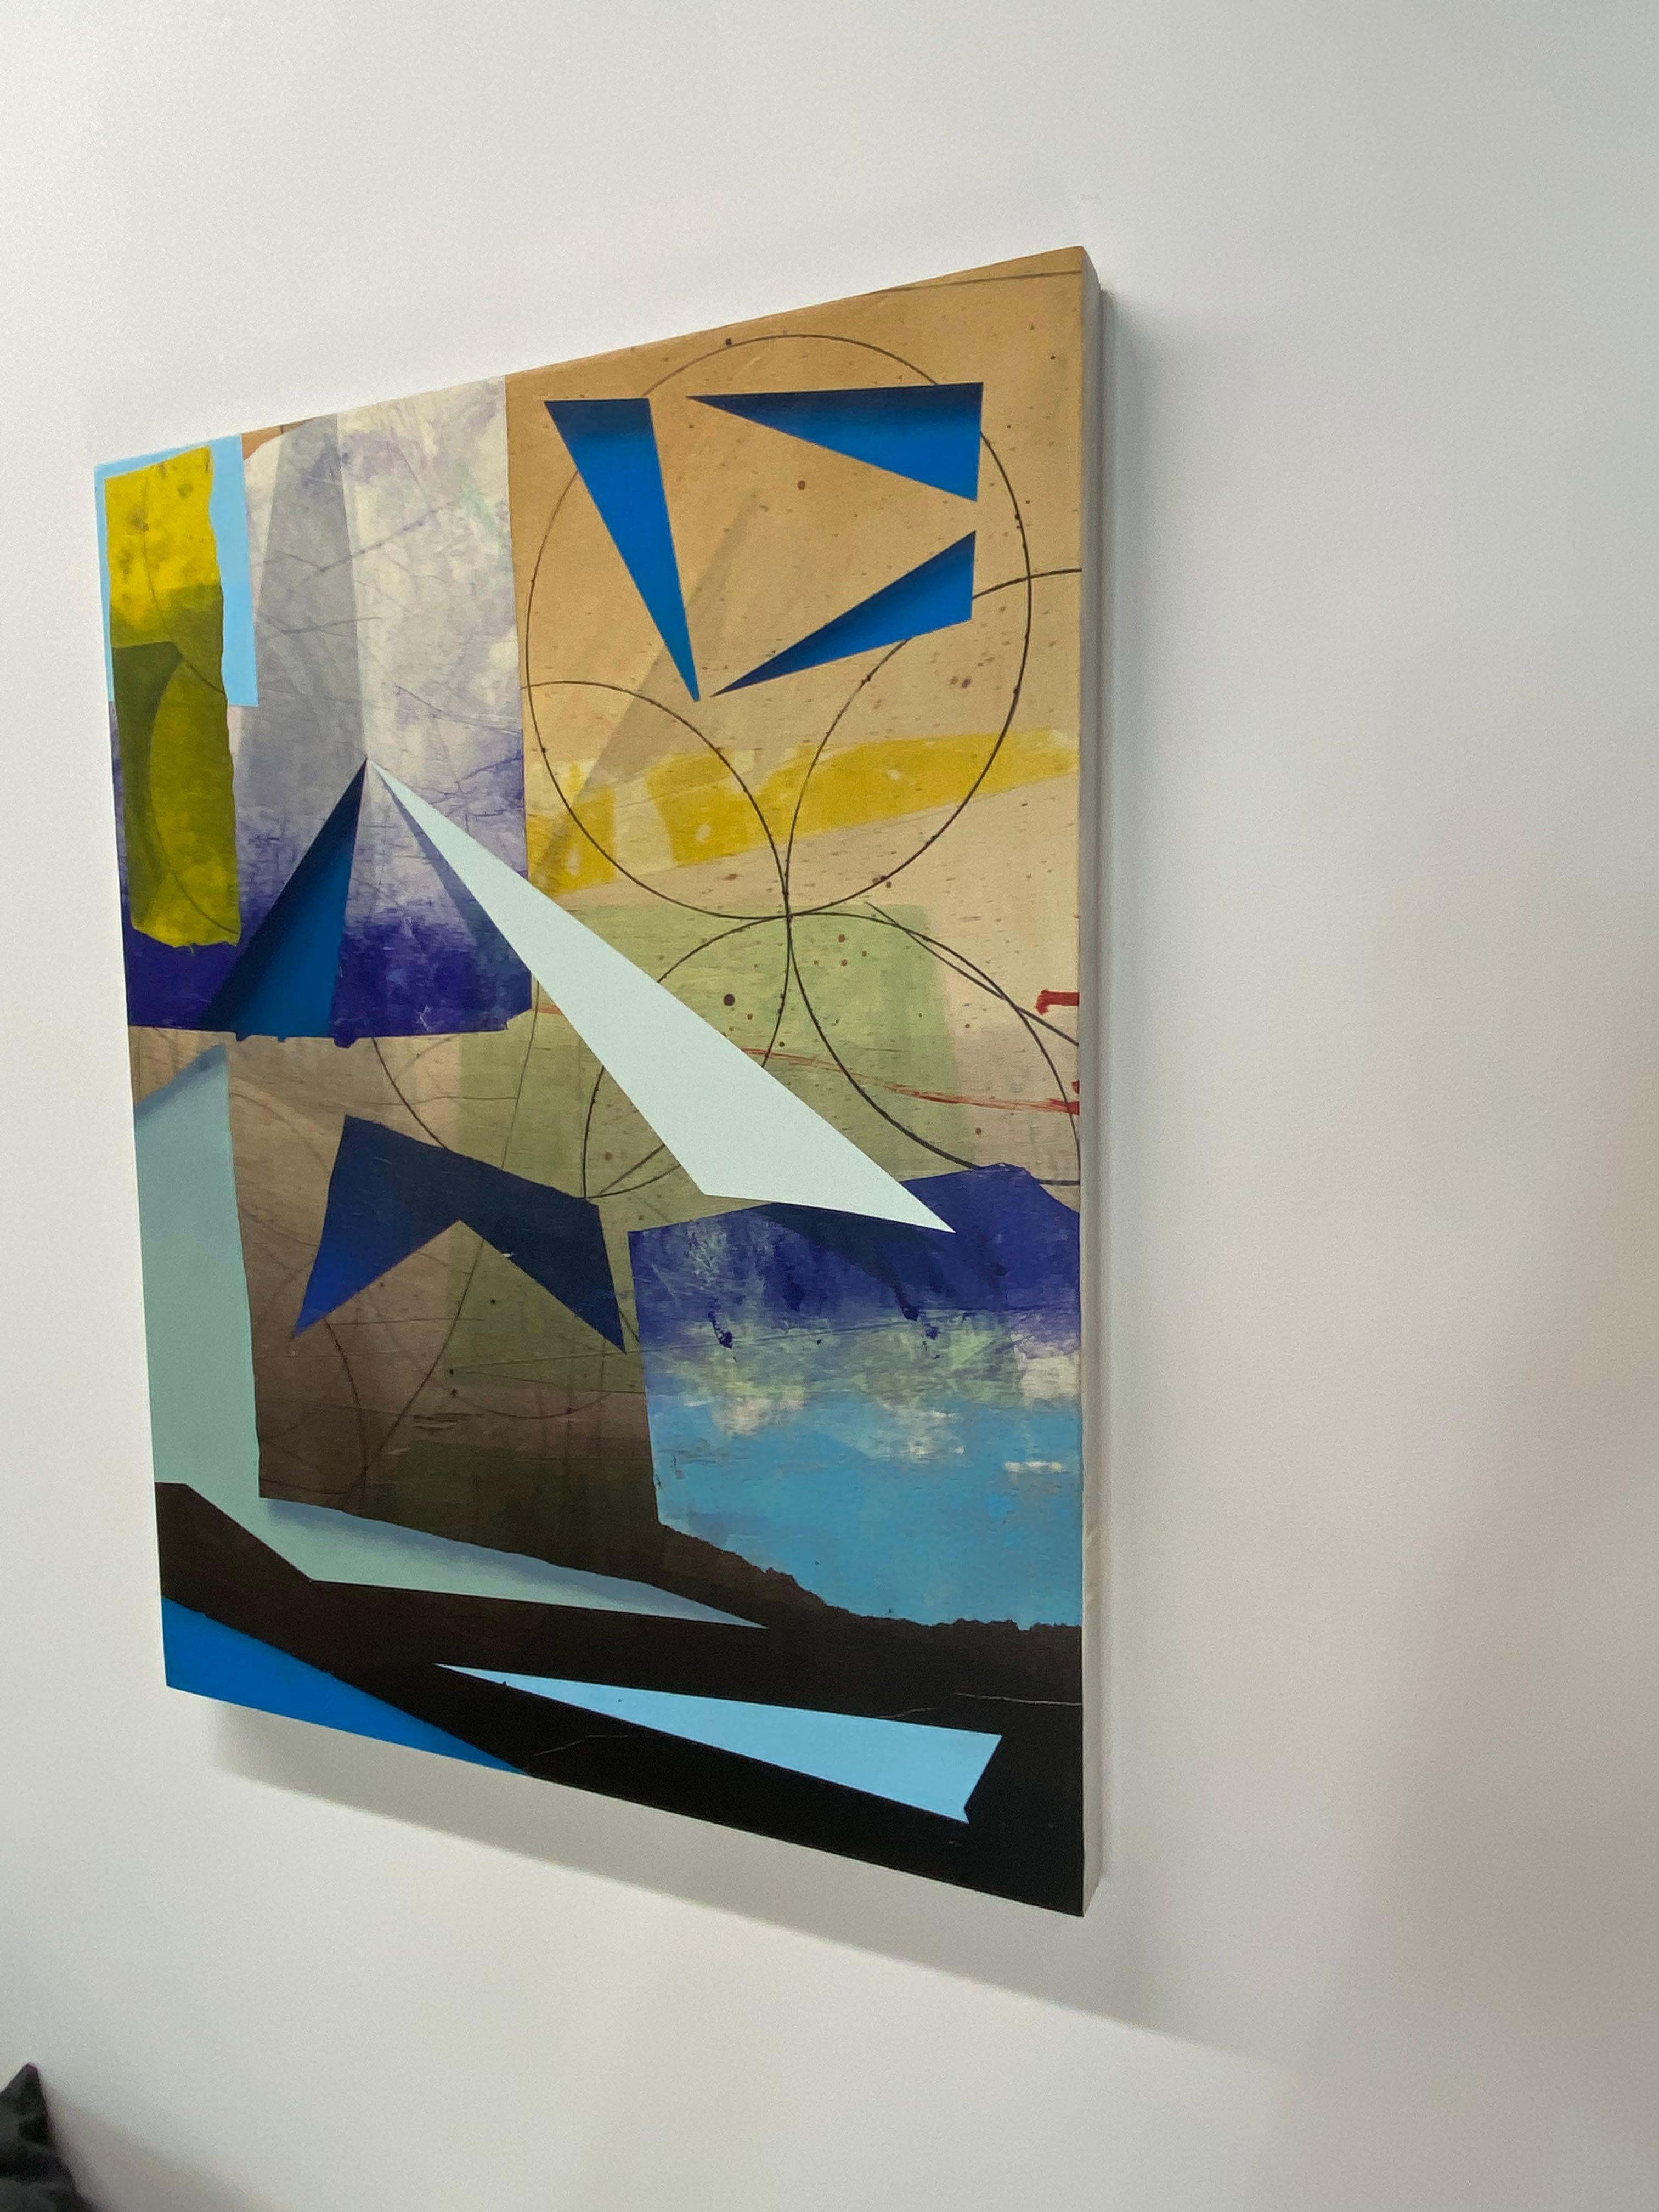 In this vertical, abstract painting in acrylic on paper on linen mounted on panel by David Collins, geometric shapes in shades of dark indigo, navy and light sky blue, soft sage green, and bright yellow are colorful and vibrant. The angles and soft